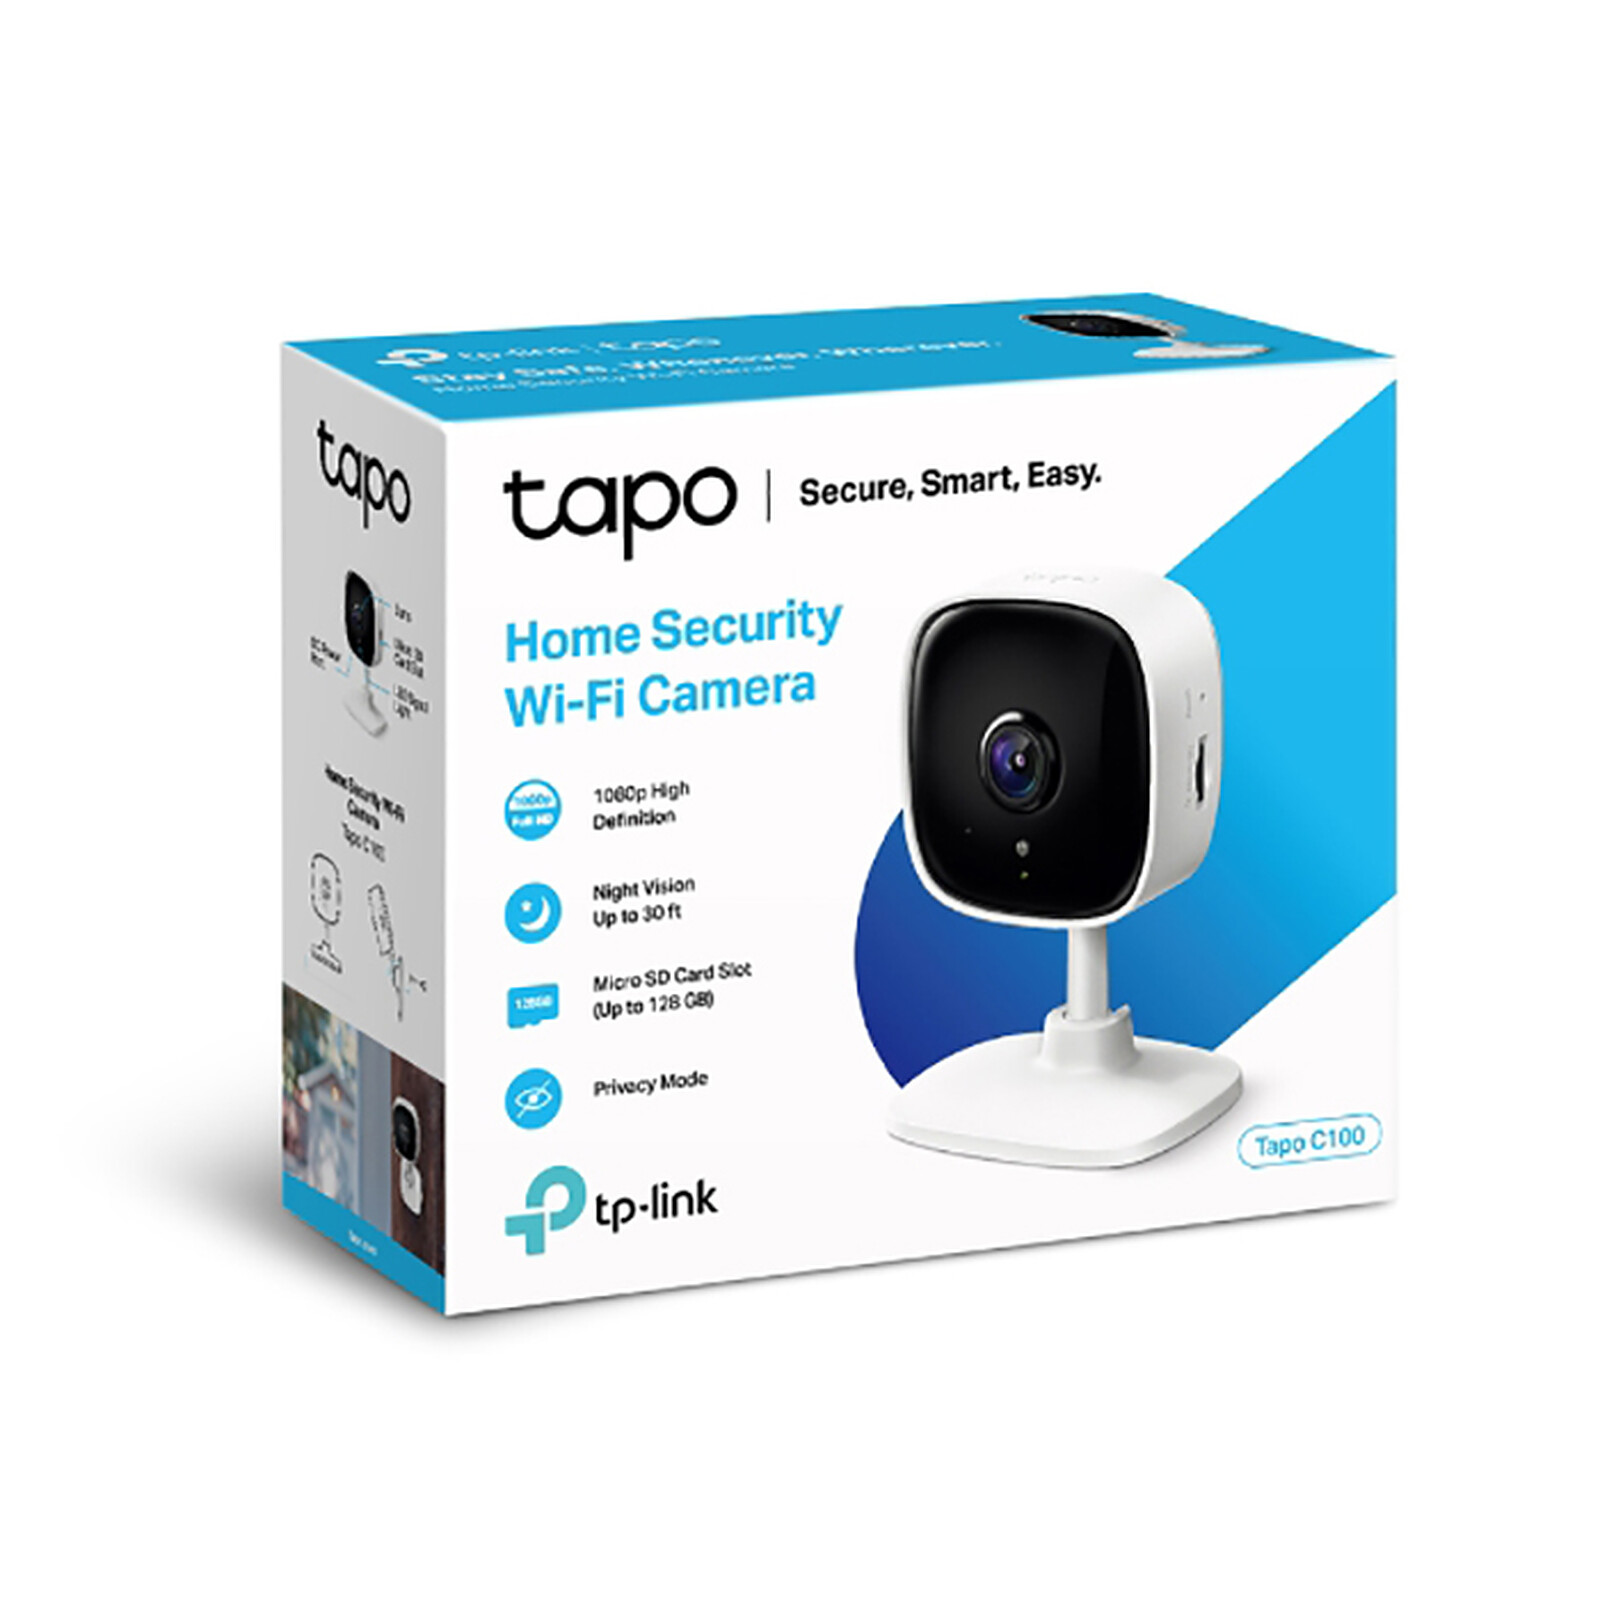 TP-Link - The TP-Link Tapo C100 joins the family! Keep an